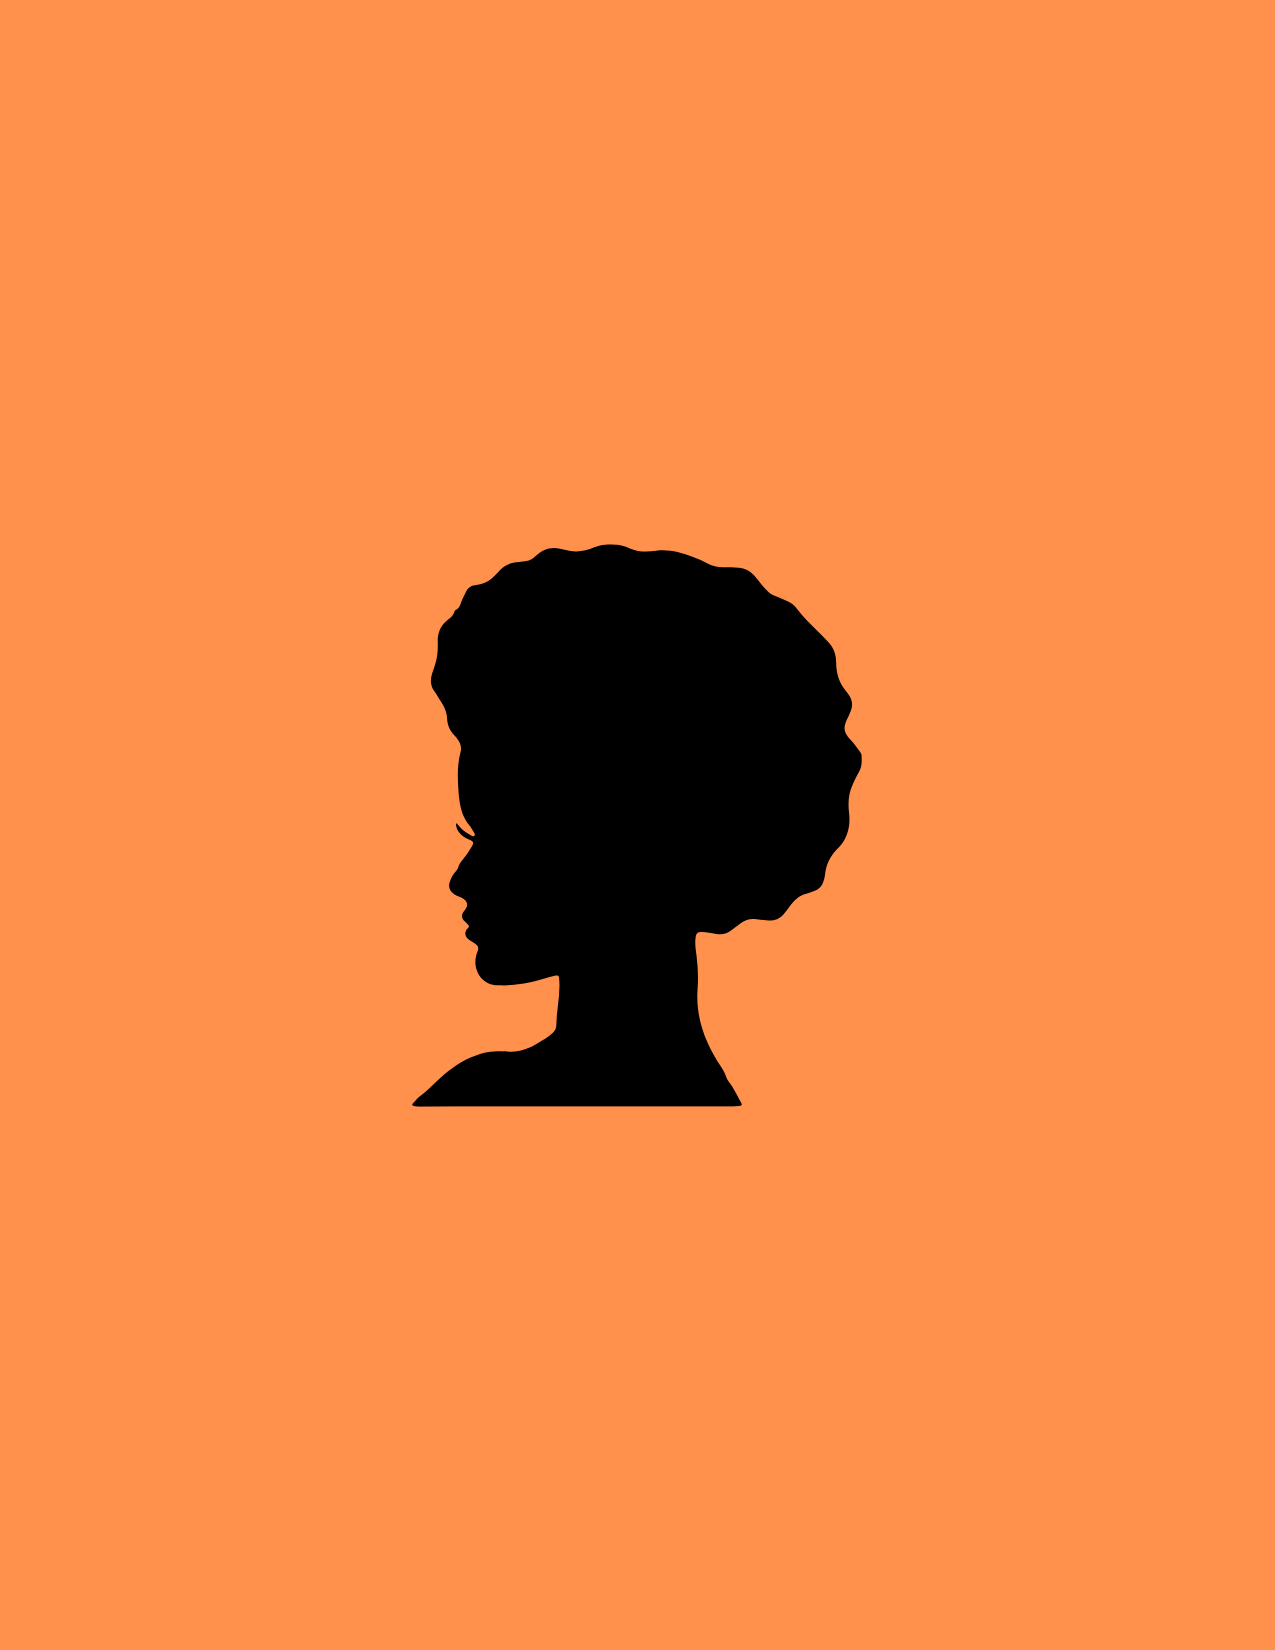 Solid tangerine  background, silhouette of afro Black woman centered, neck and partial shoulder